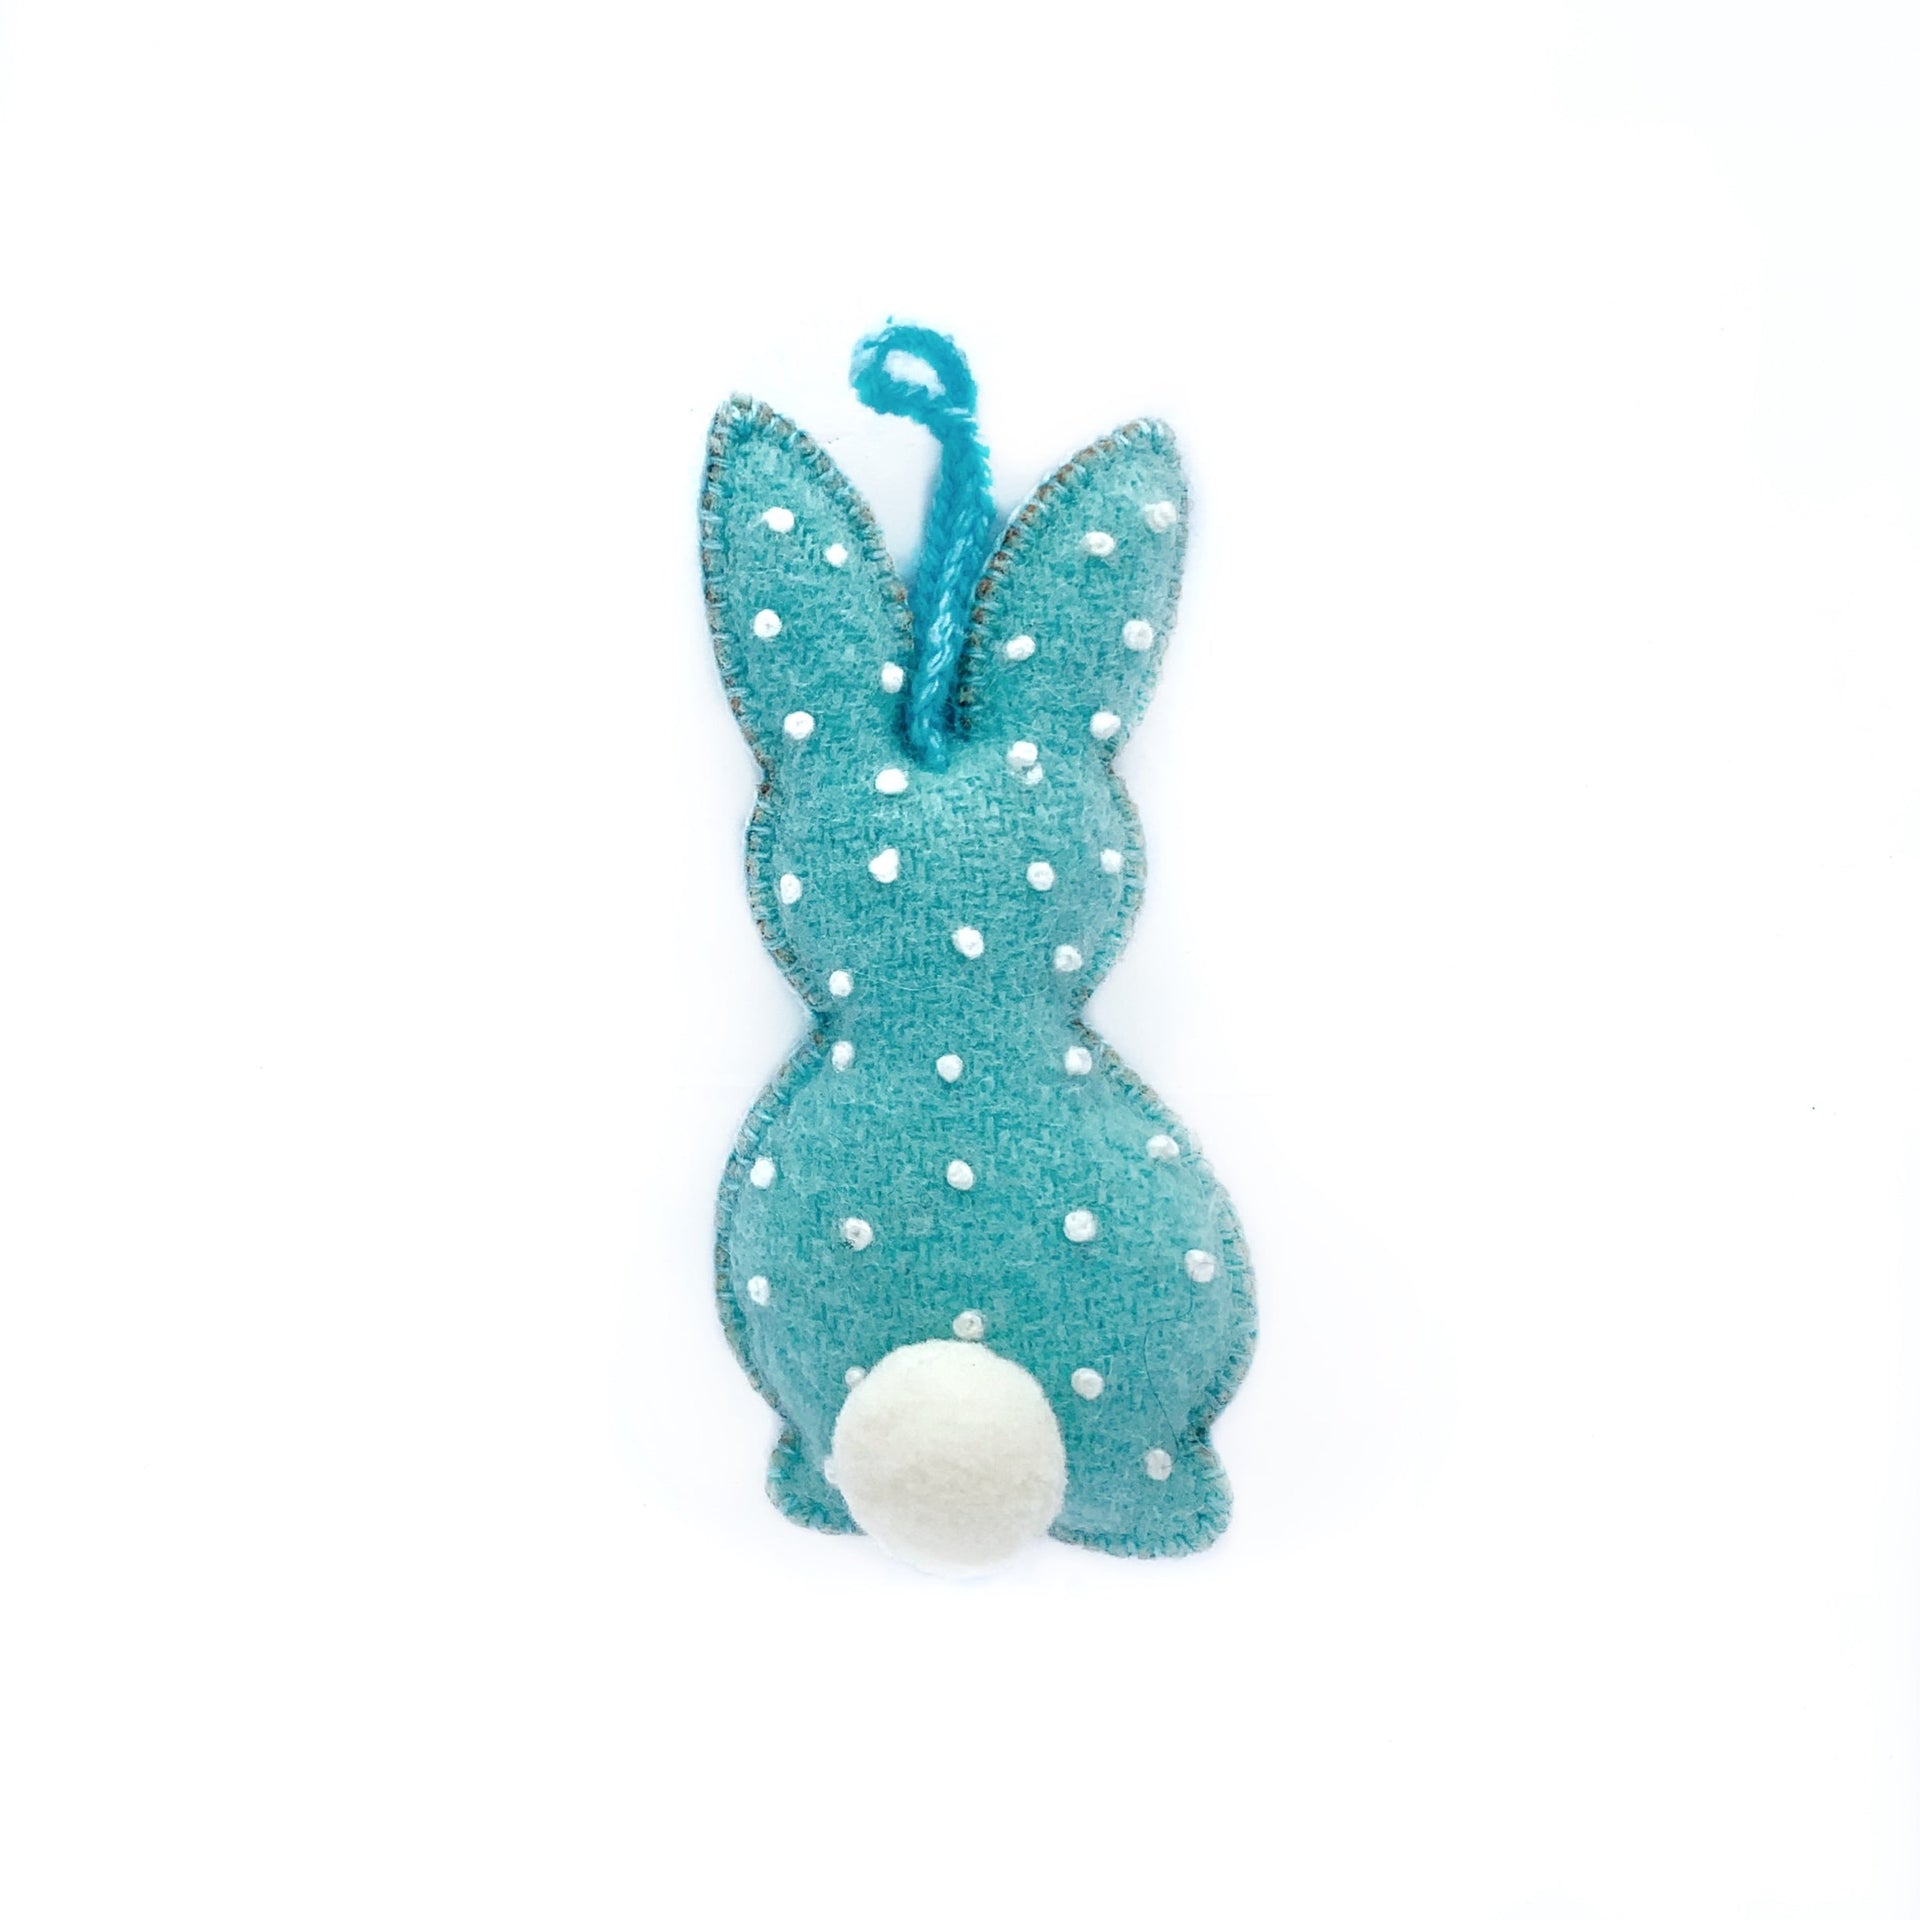 Pastel blue handmade Easter bunny ornament with embroidered white dots and pom pom tail.